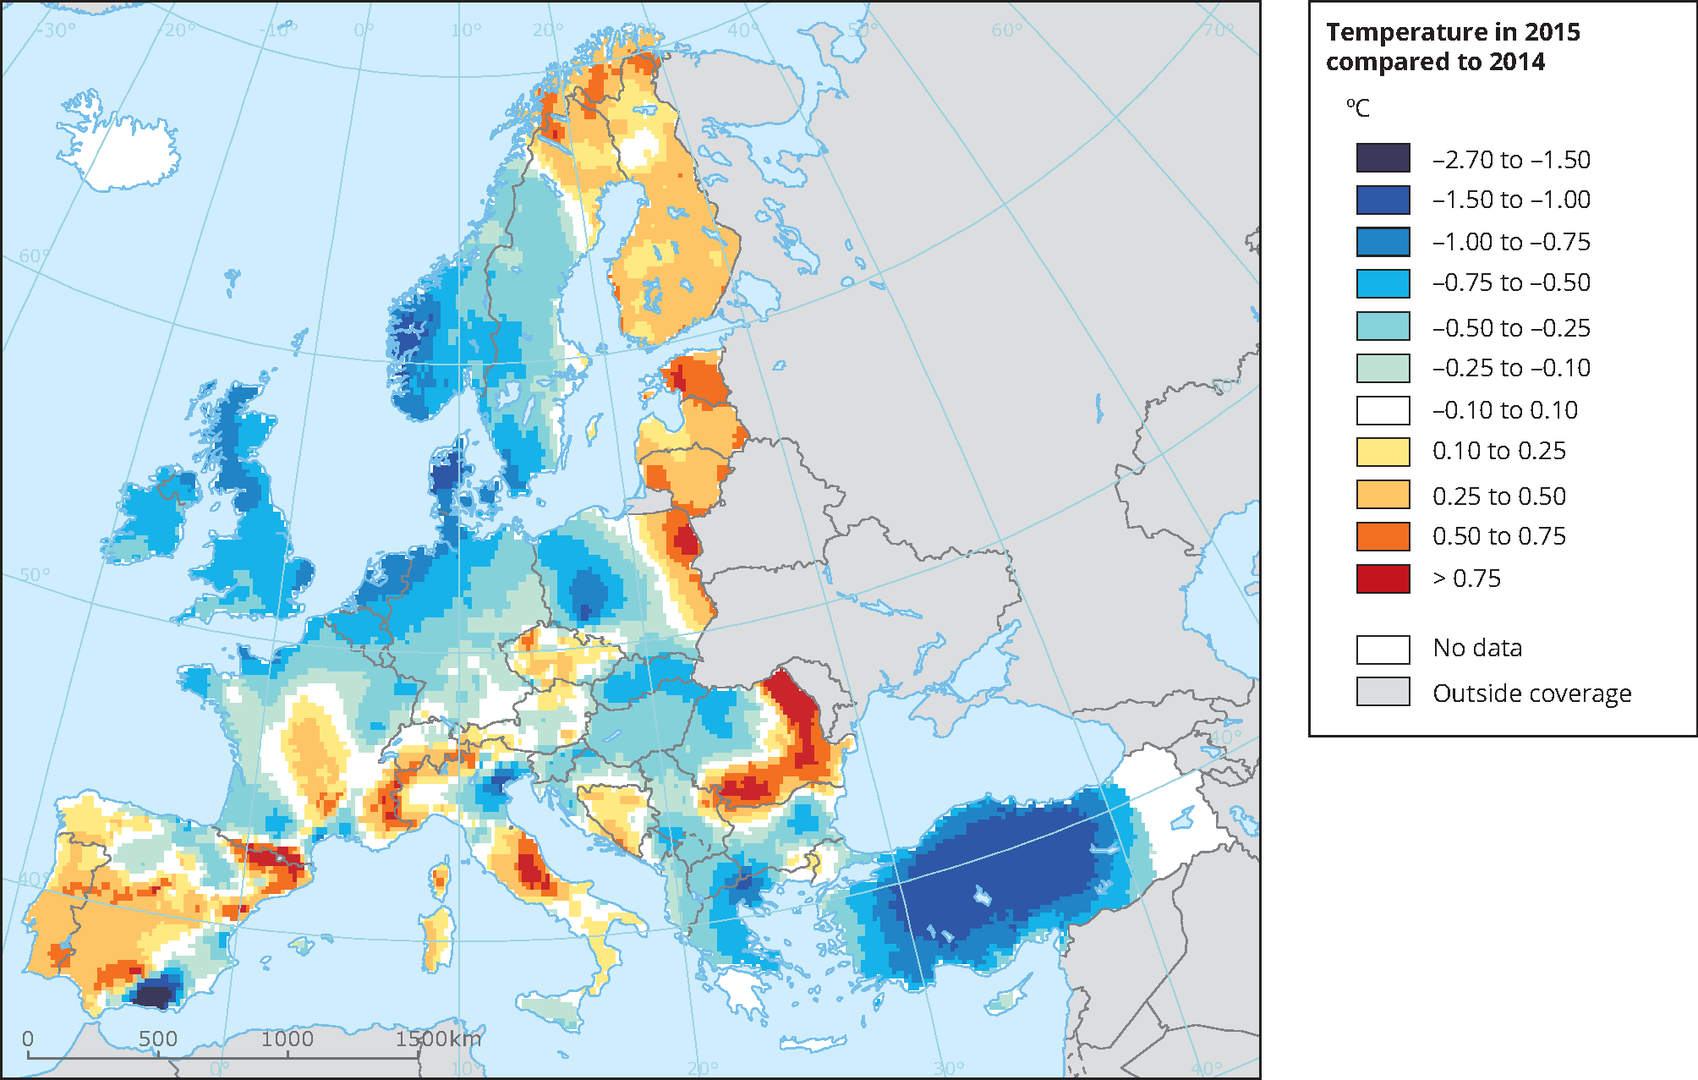 Temperature Map of Europe #geography